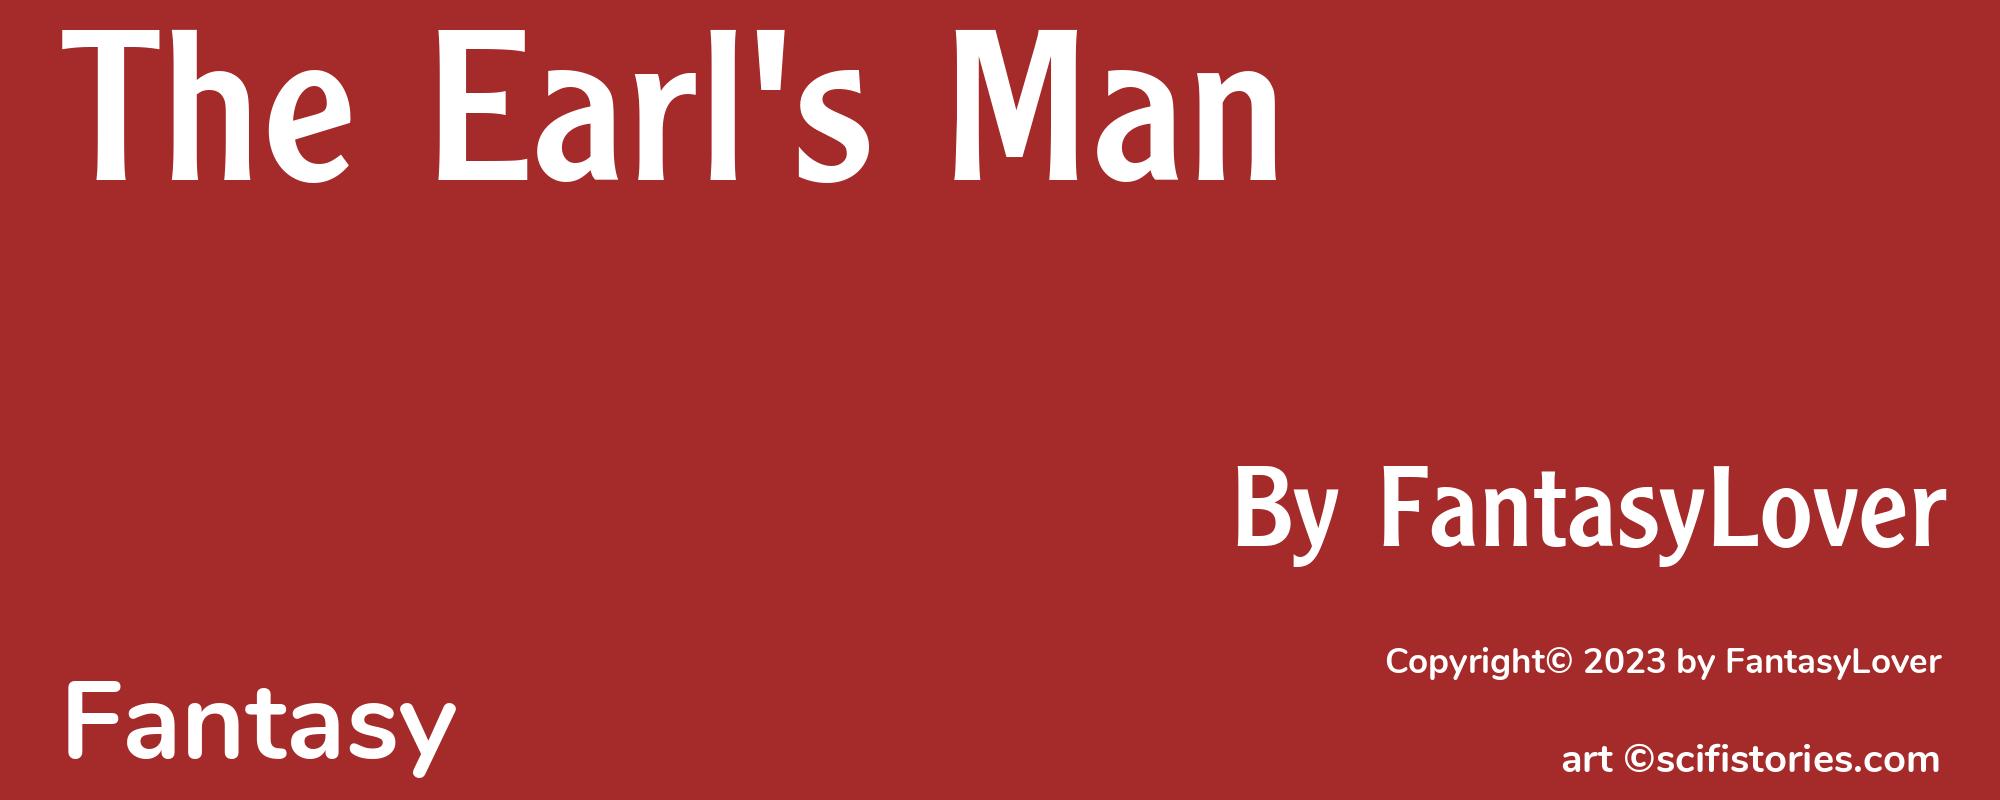 The Earl's Man - Cover